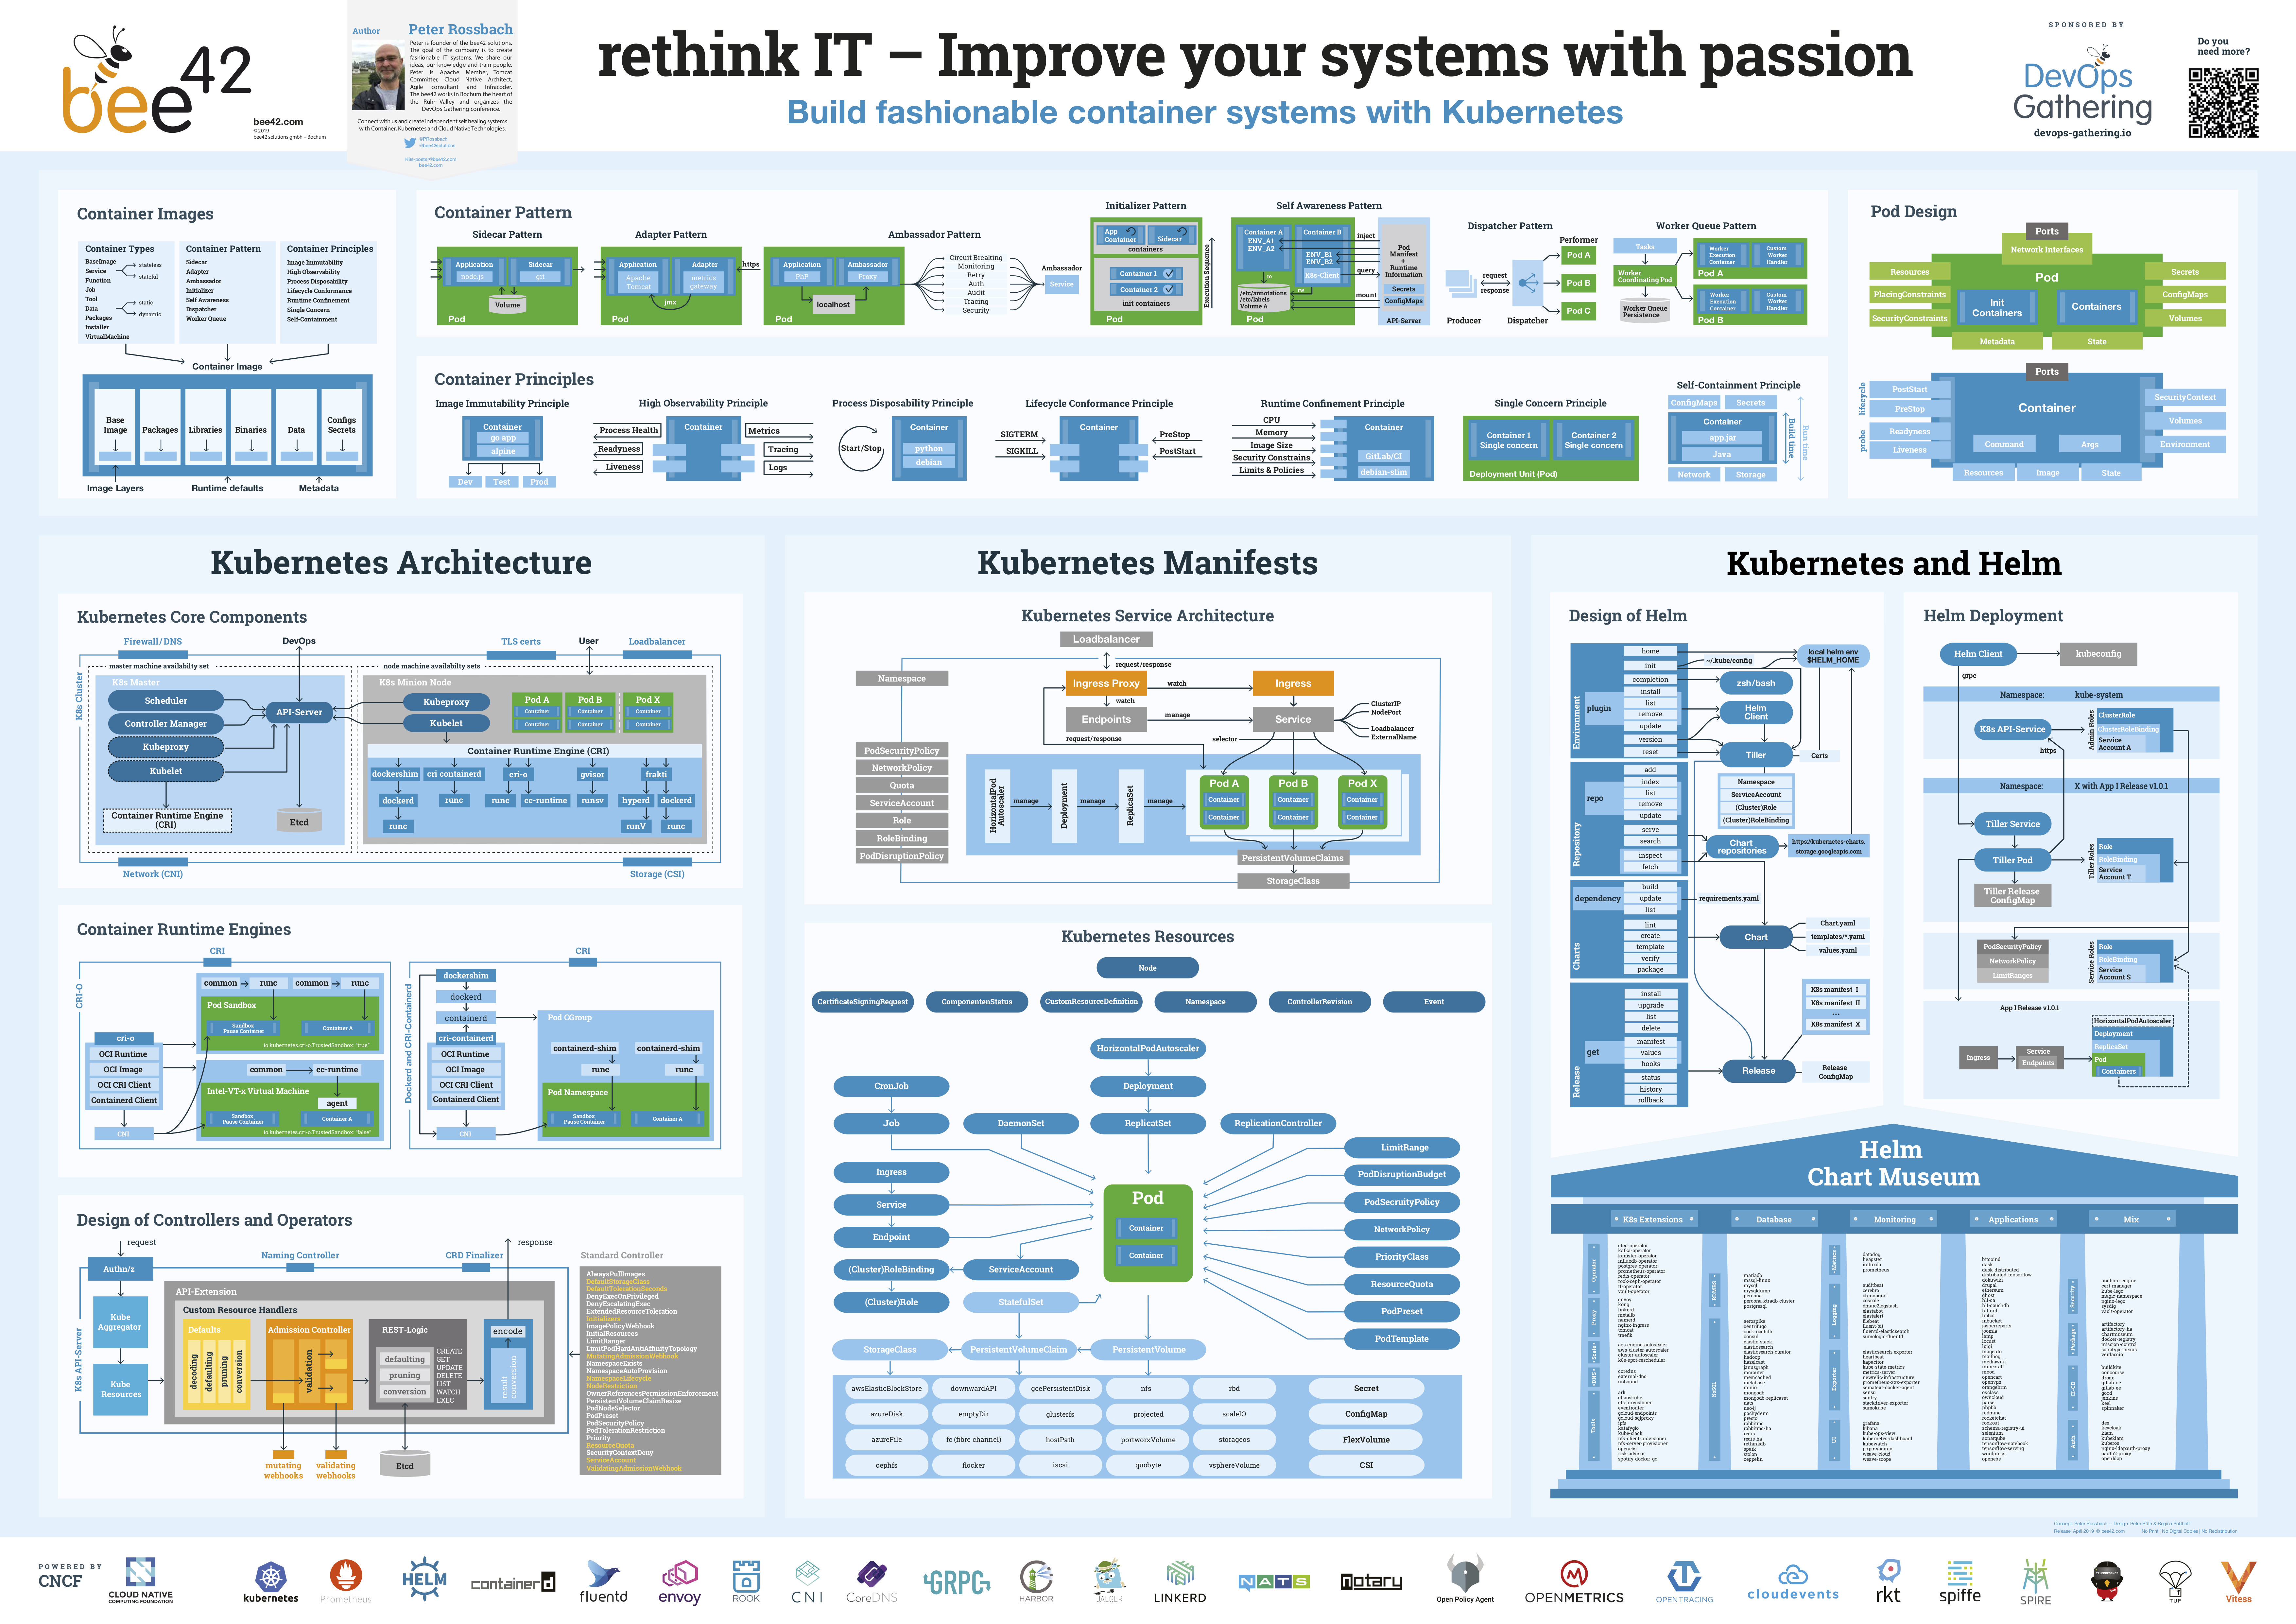 bee42-Kubernetes-Poster-PeterRossbach_2019_04.png